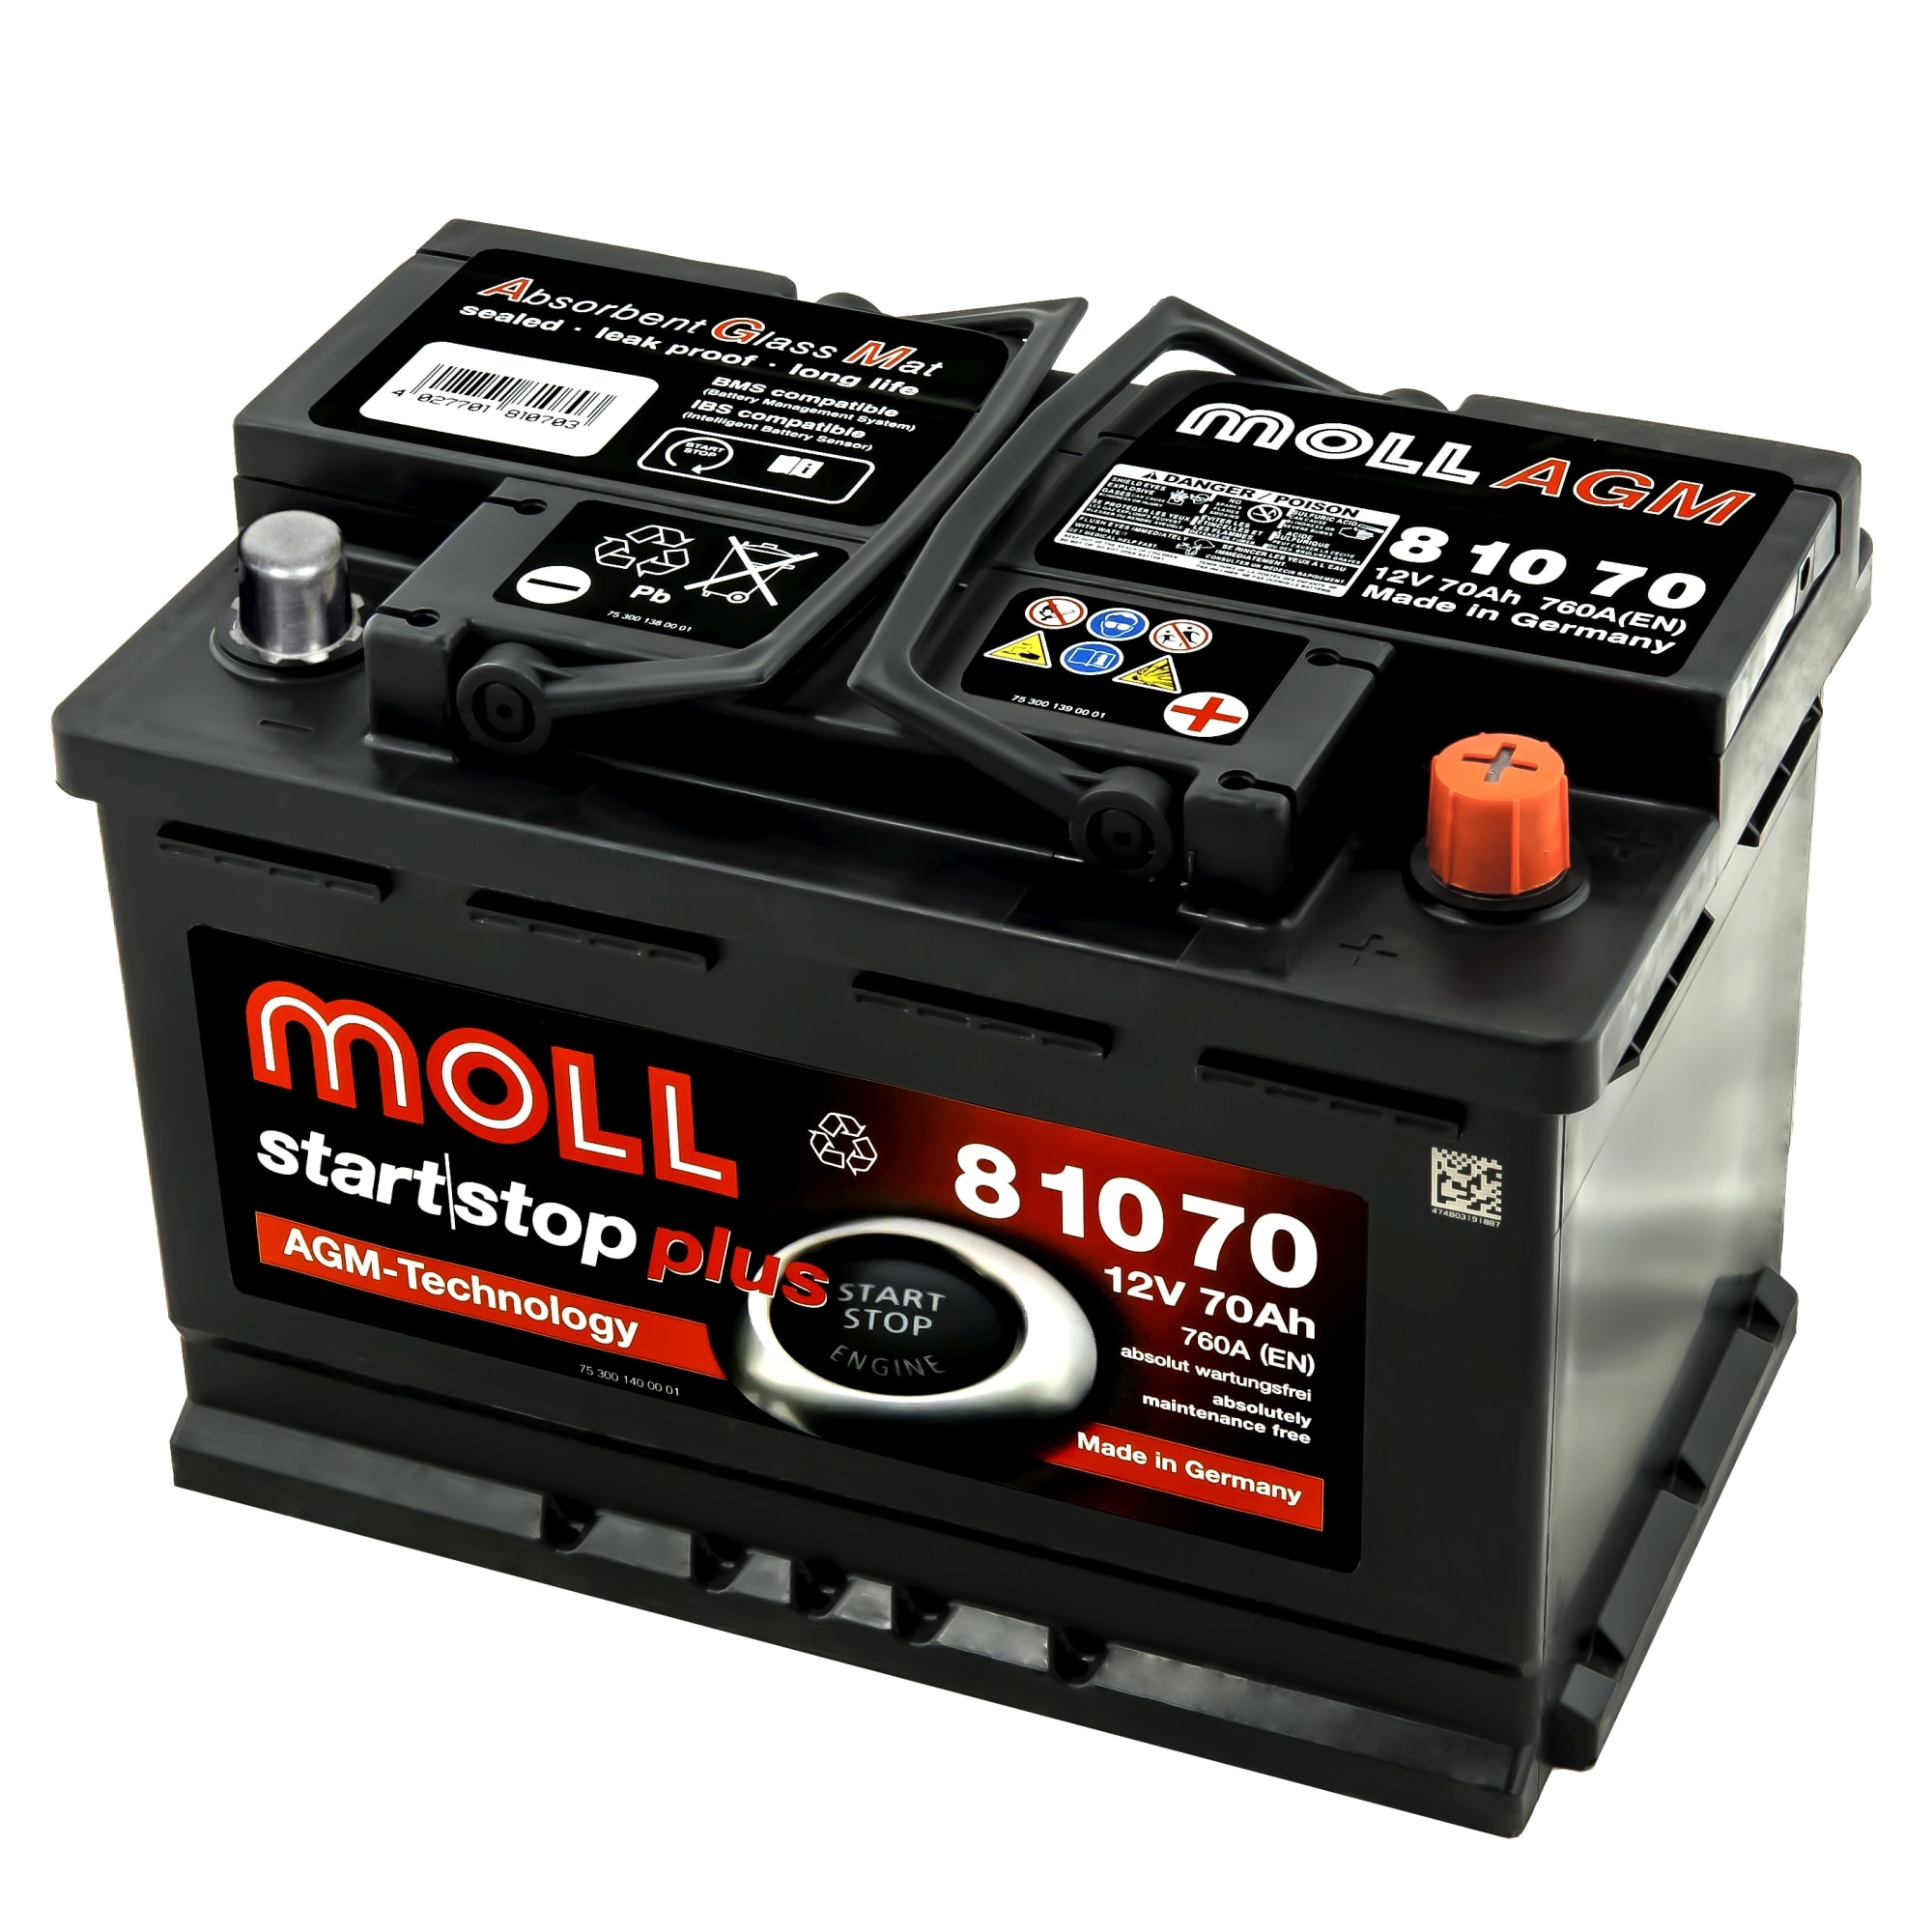 Baterie auto Moll start/stop plus AGM 70Ah 81070 - eMAG.ro